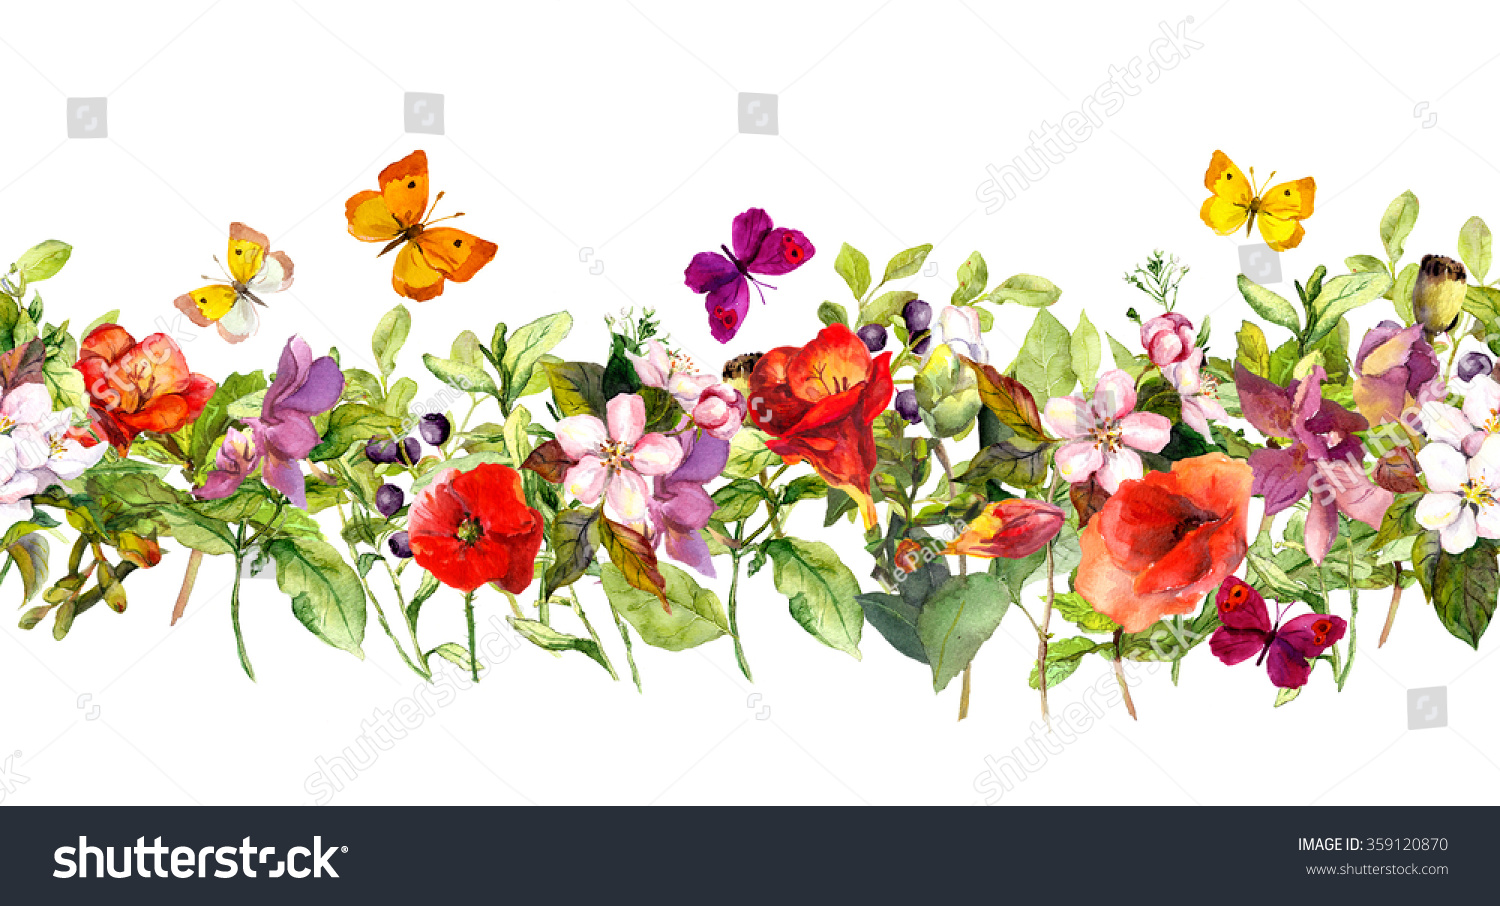 Floral Horizontal Border Watercolor Meadow Flowers Stock ...